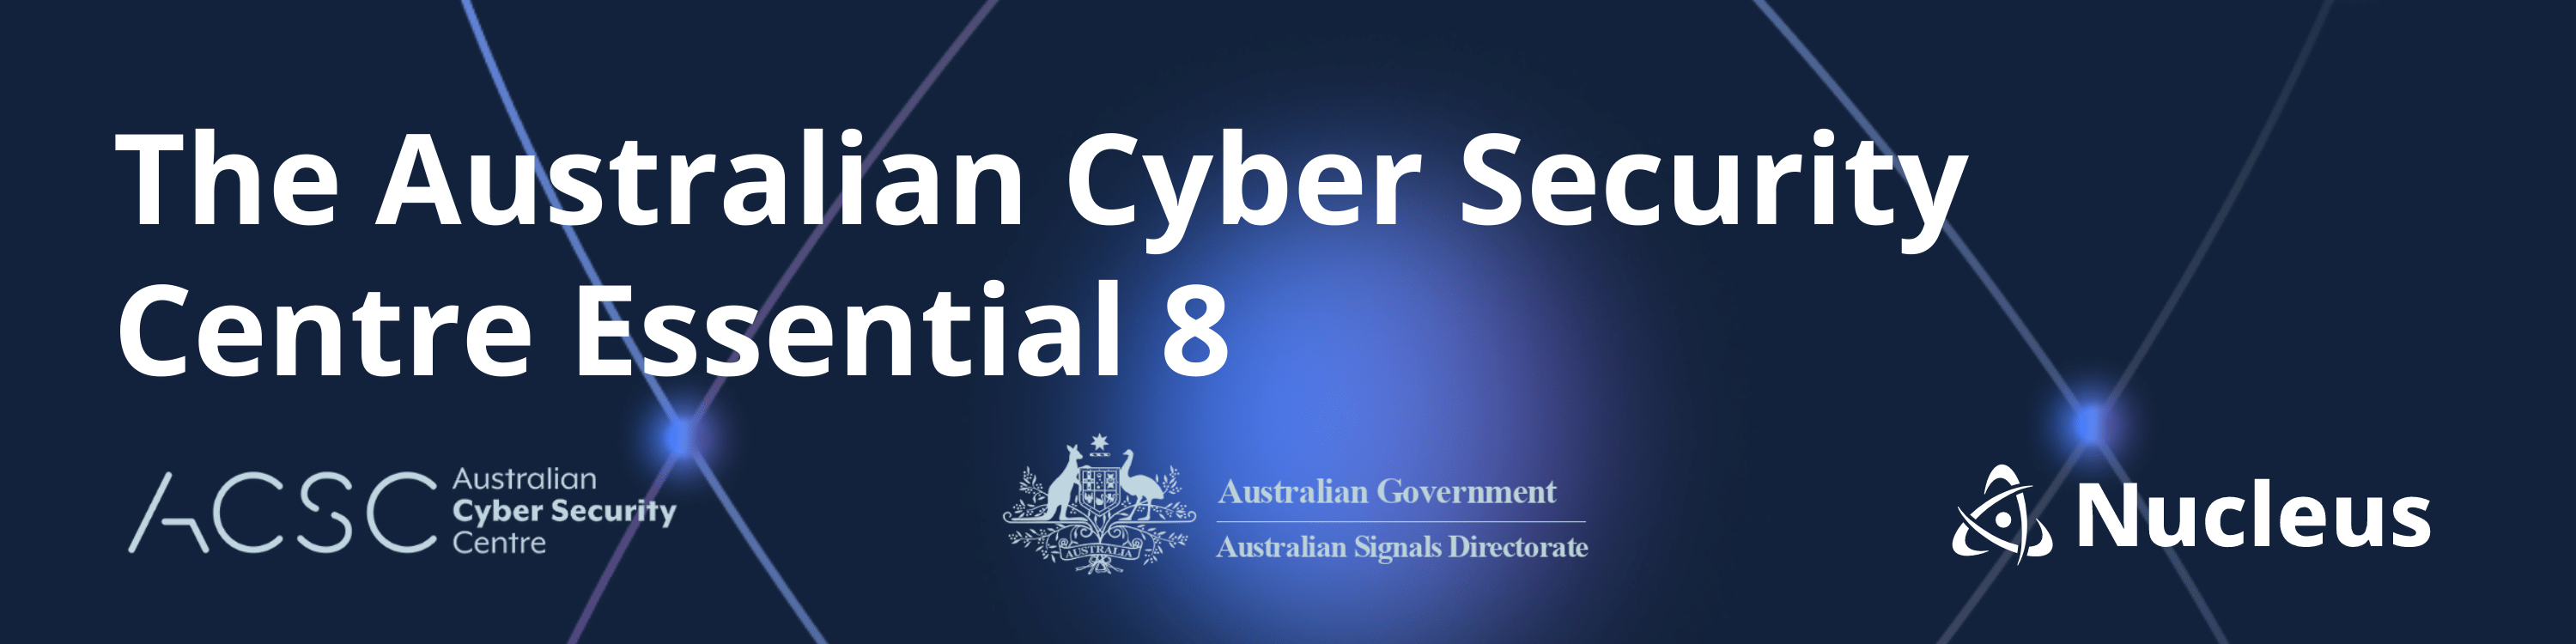 The Australian Cyber Security Centre Essential 8